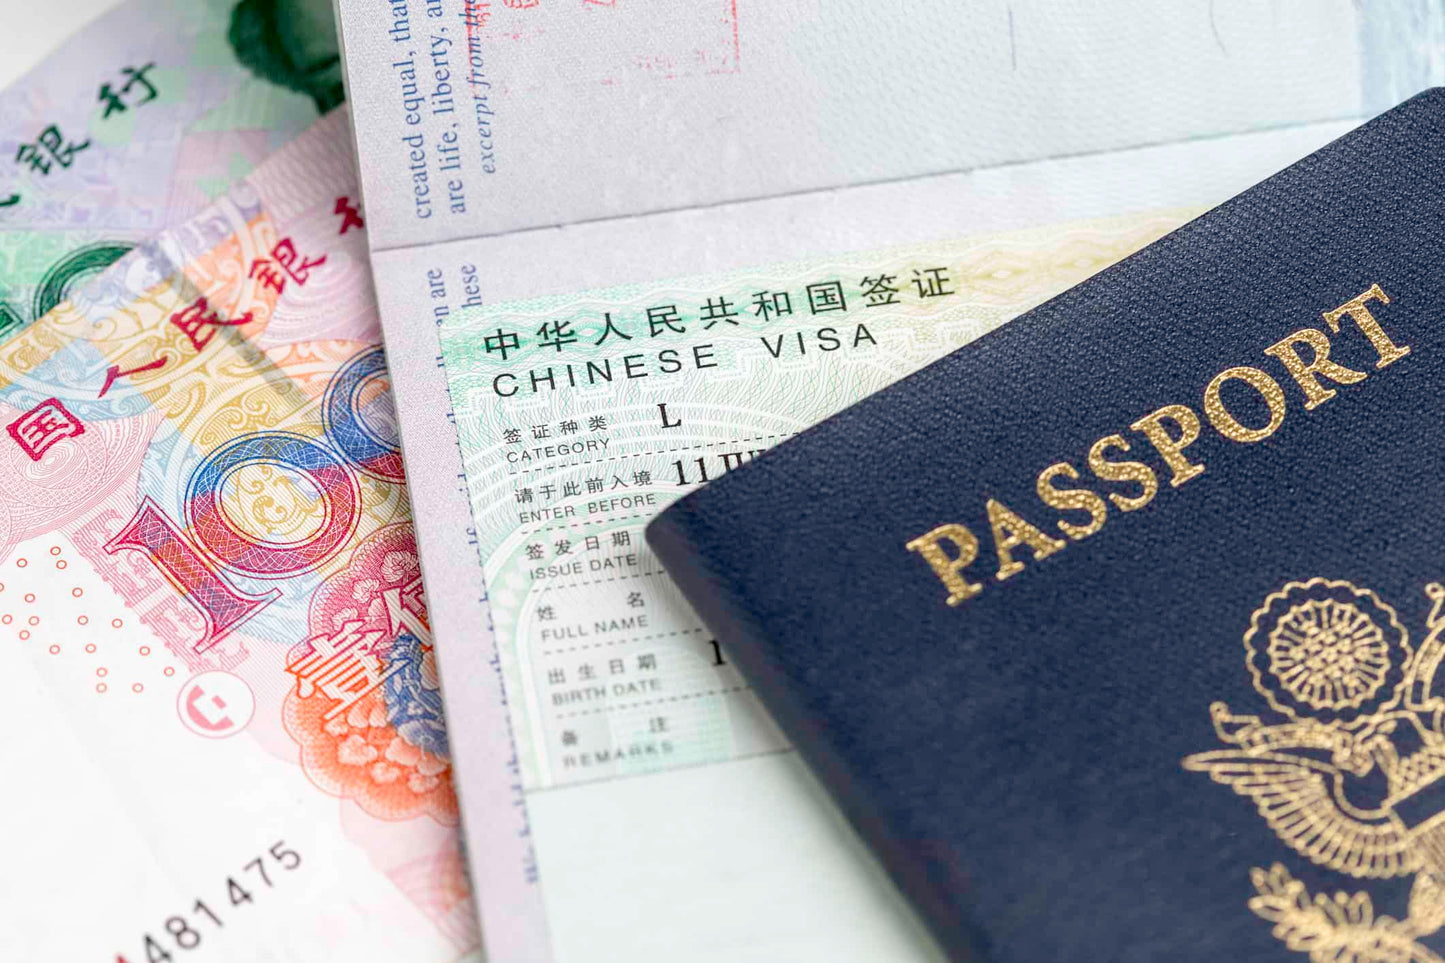 China M Business Visa All Fees Are Included (NY Consular District)